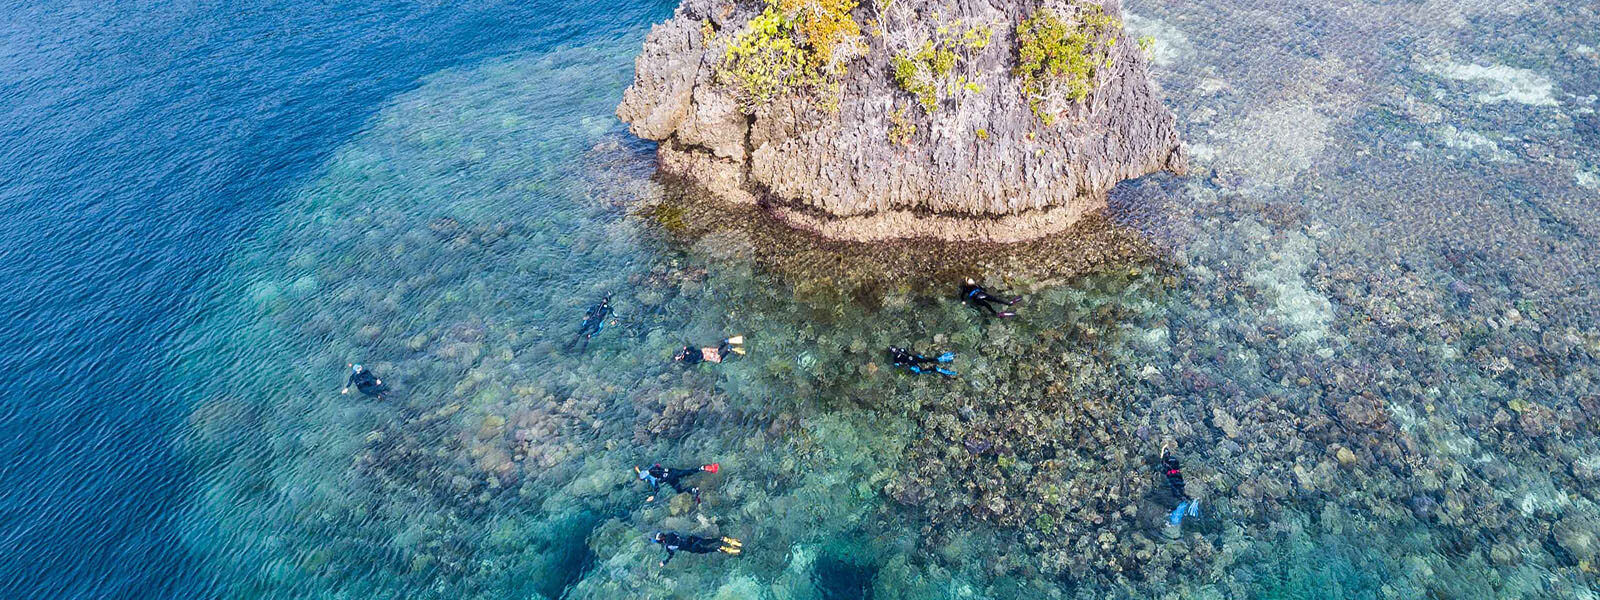 Snorkelers enjoying a reef on coral triangle adventures snorkeling tour to Raja Ampat